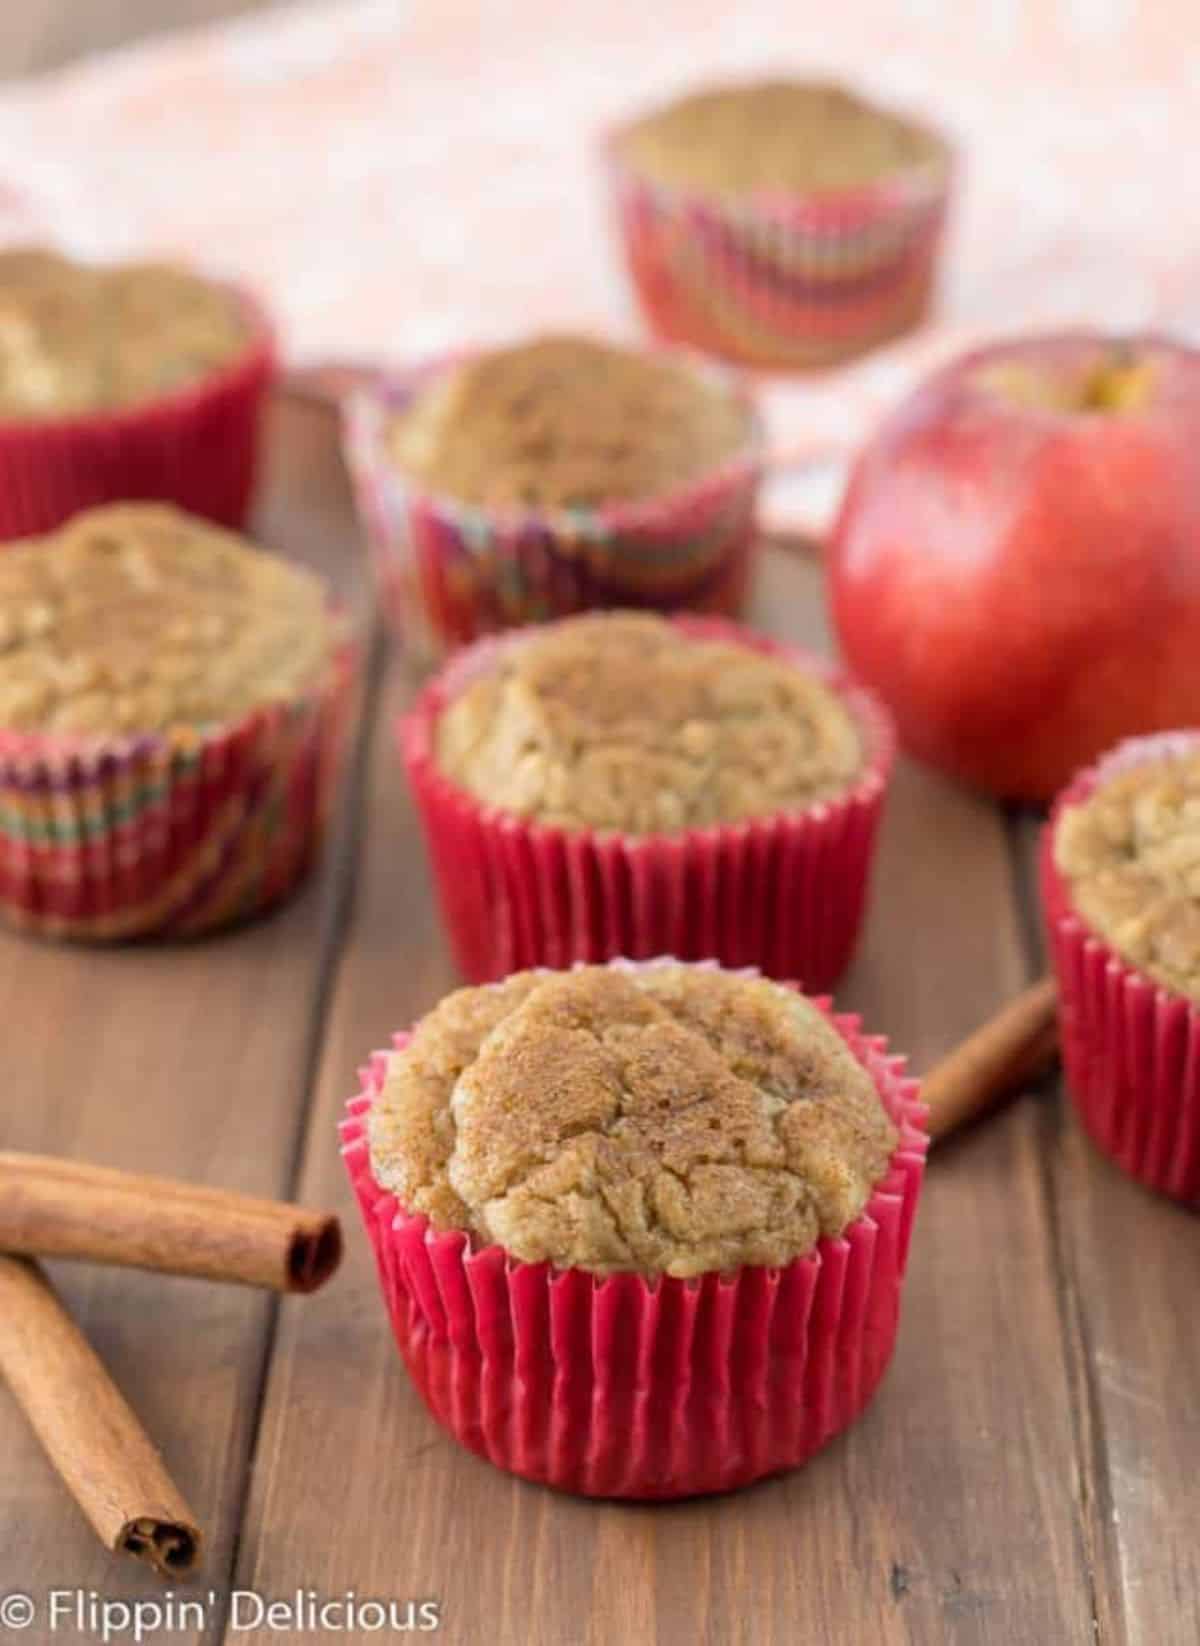 Delicious Gluten-Free Apple Muffins with cinnamon sticks on a wooden table.